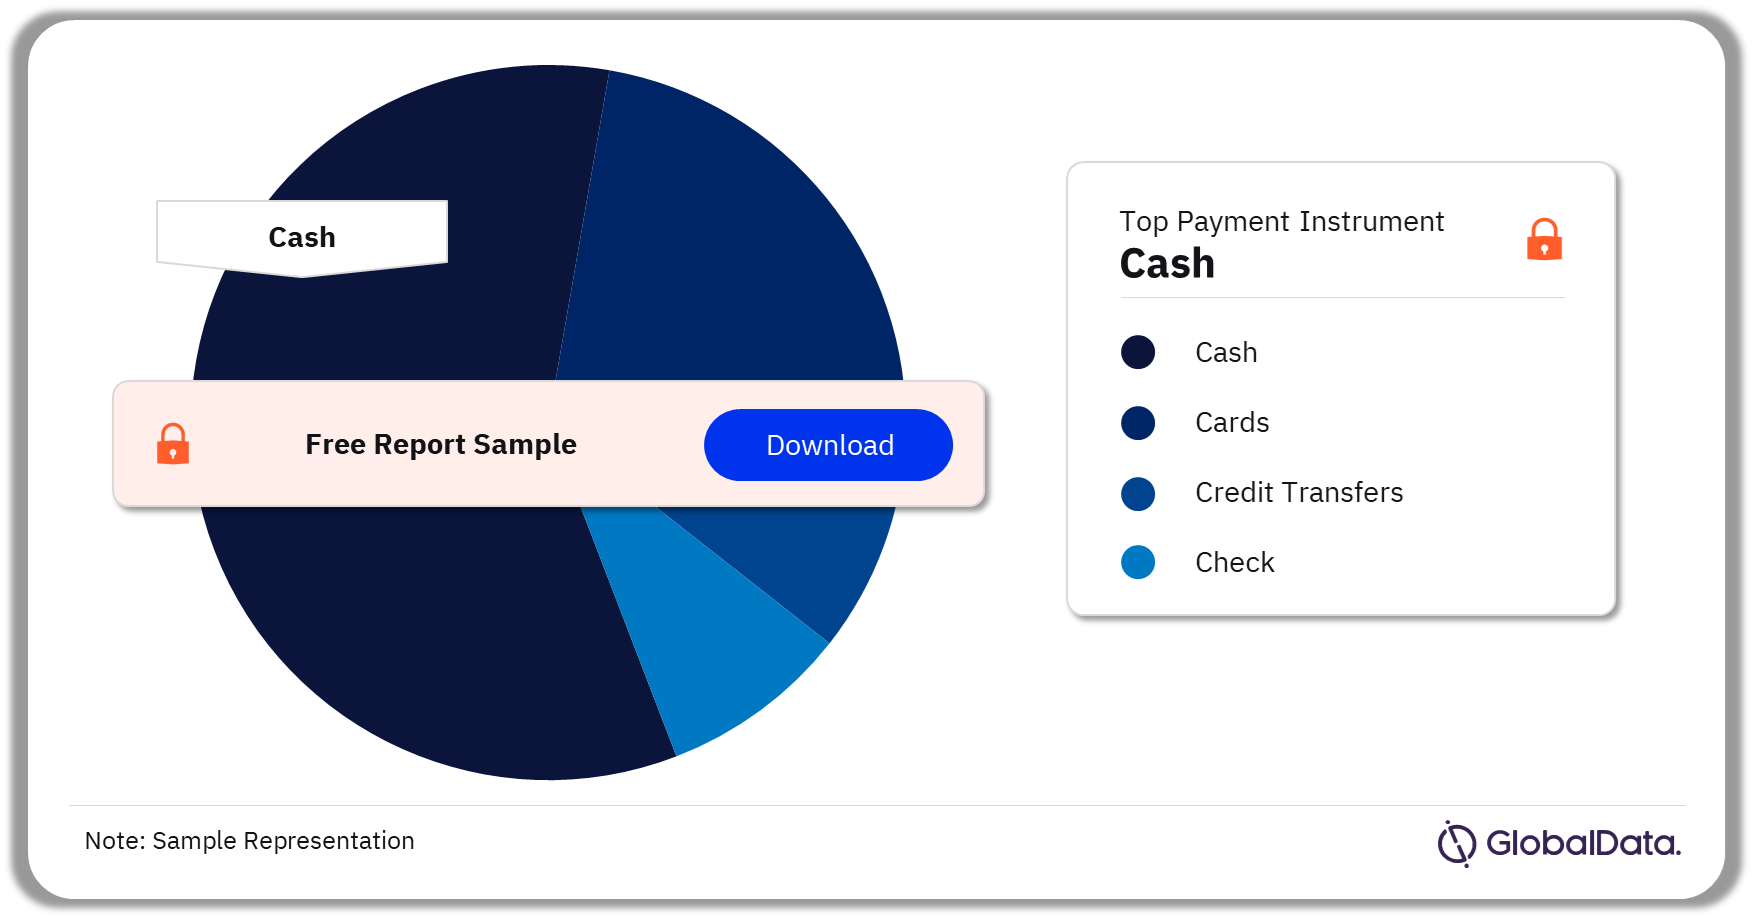 Turkey Cards and Payments Market Analysis by Payment Instruments, 2022 (%)